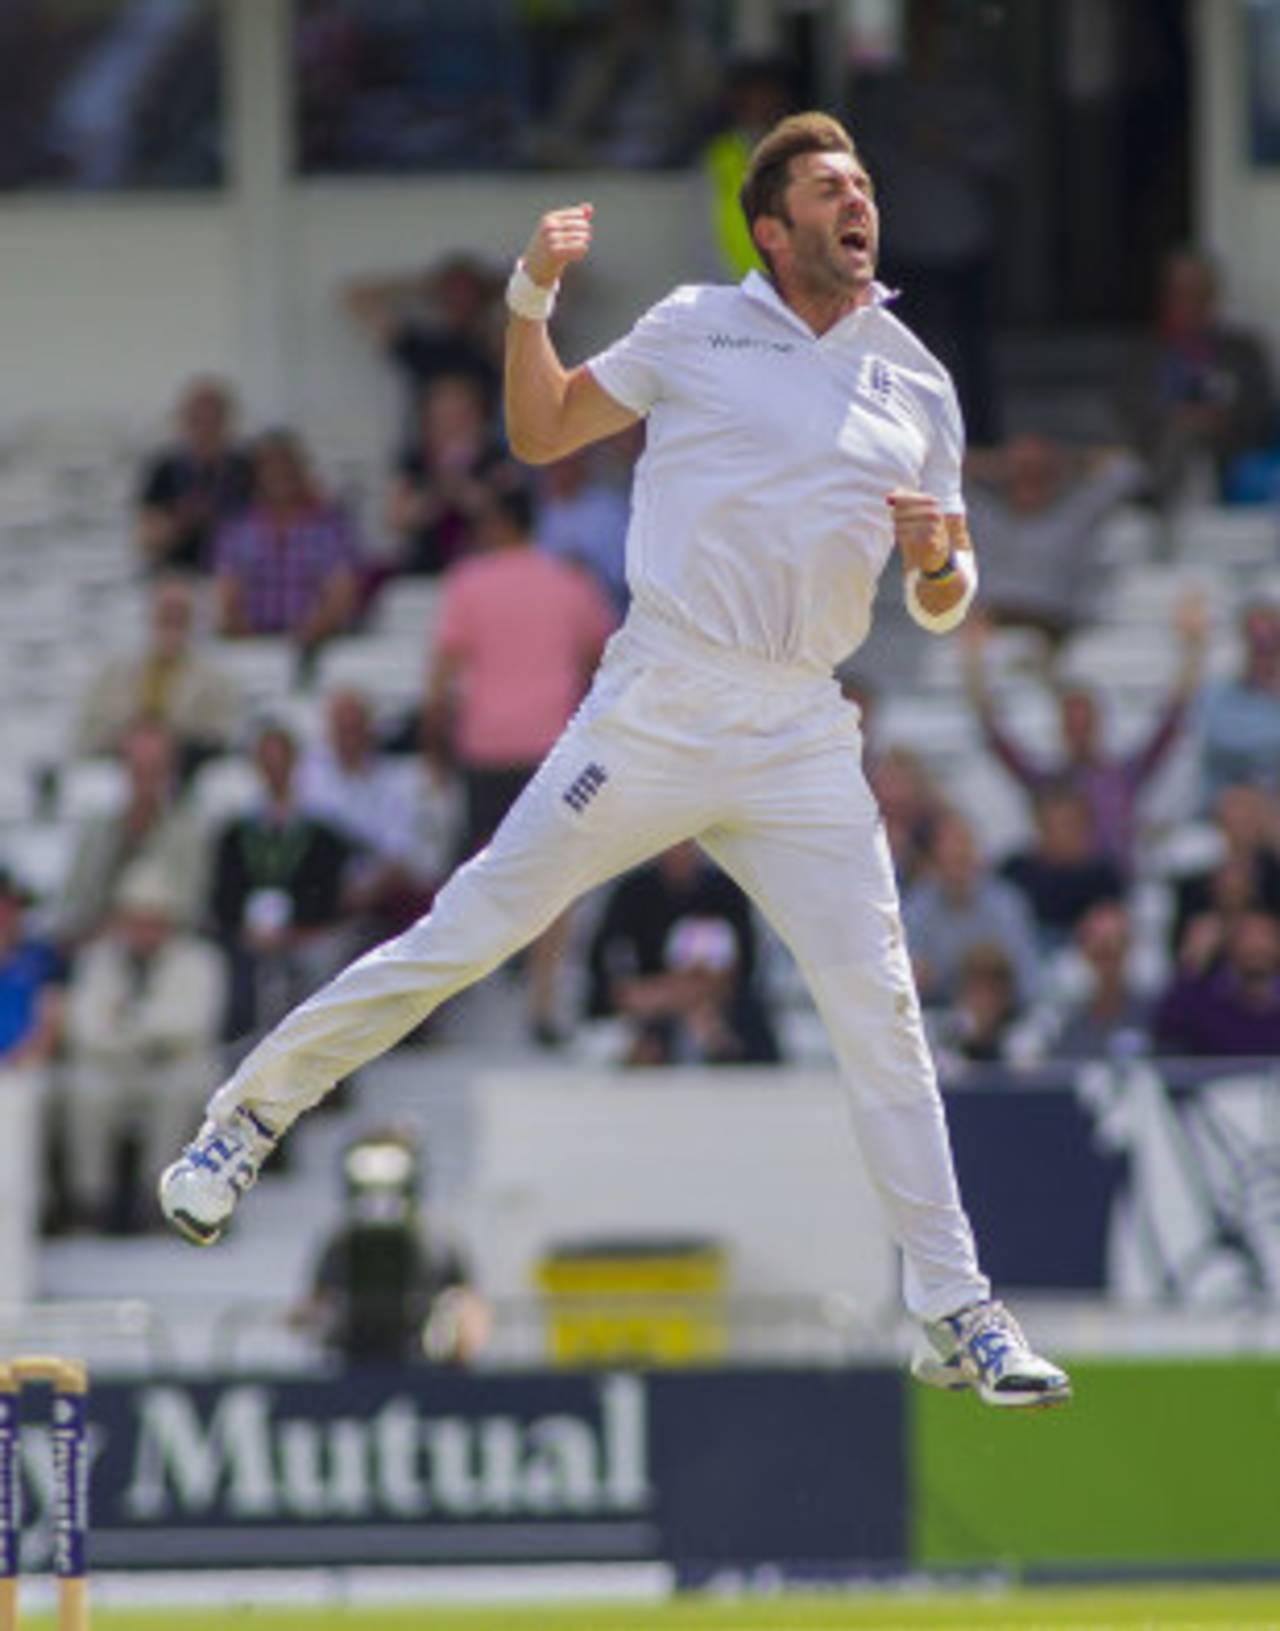 Liam Plunkett brought an added dimension to England's attack on his return to Test cricket&nbsp;&nbsp;&bull;&nbsp;&nbsp;Getty Images